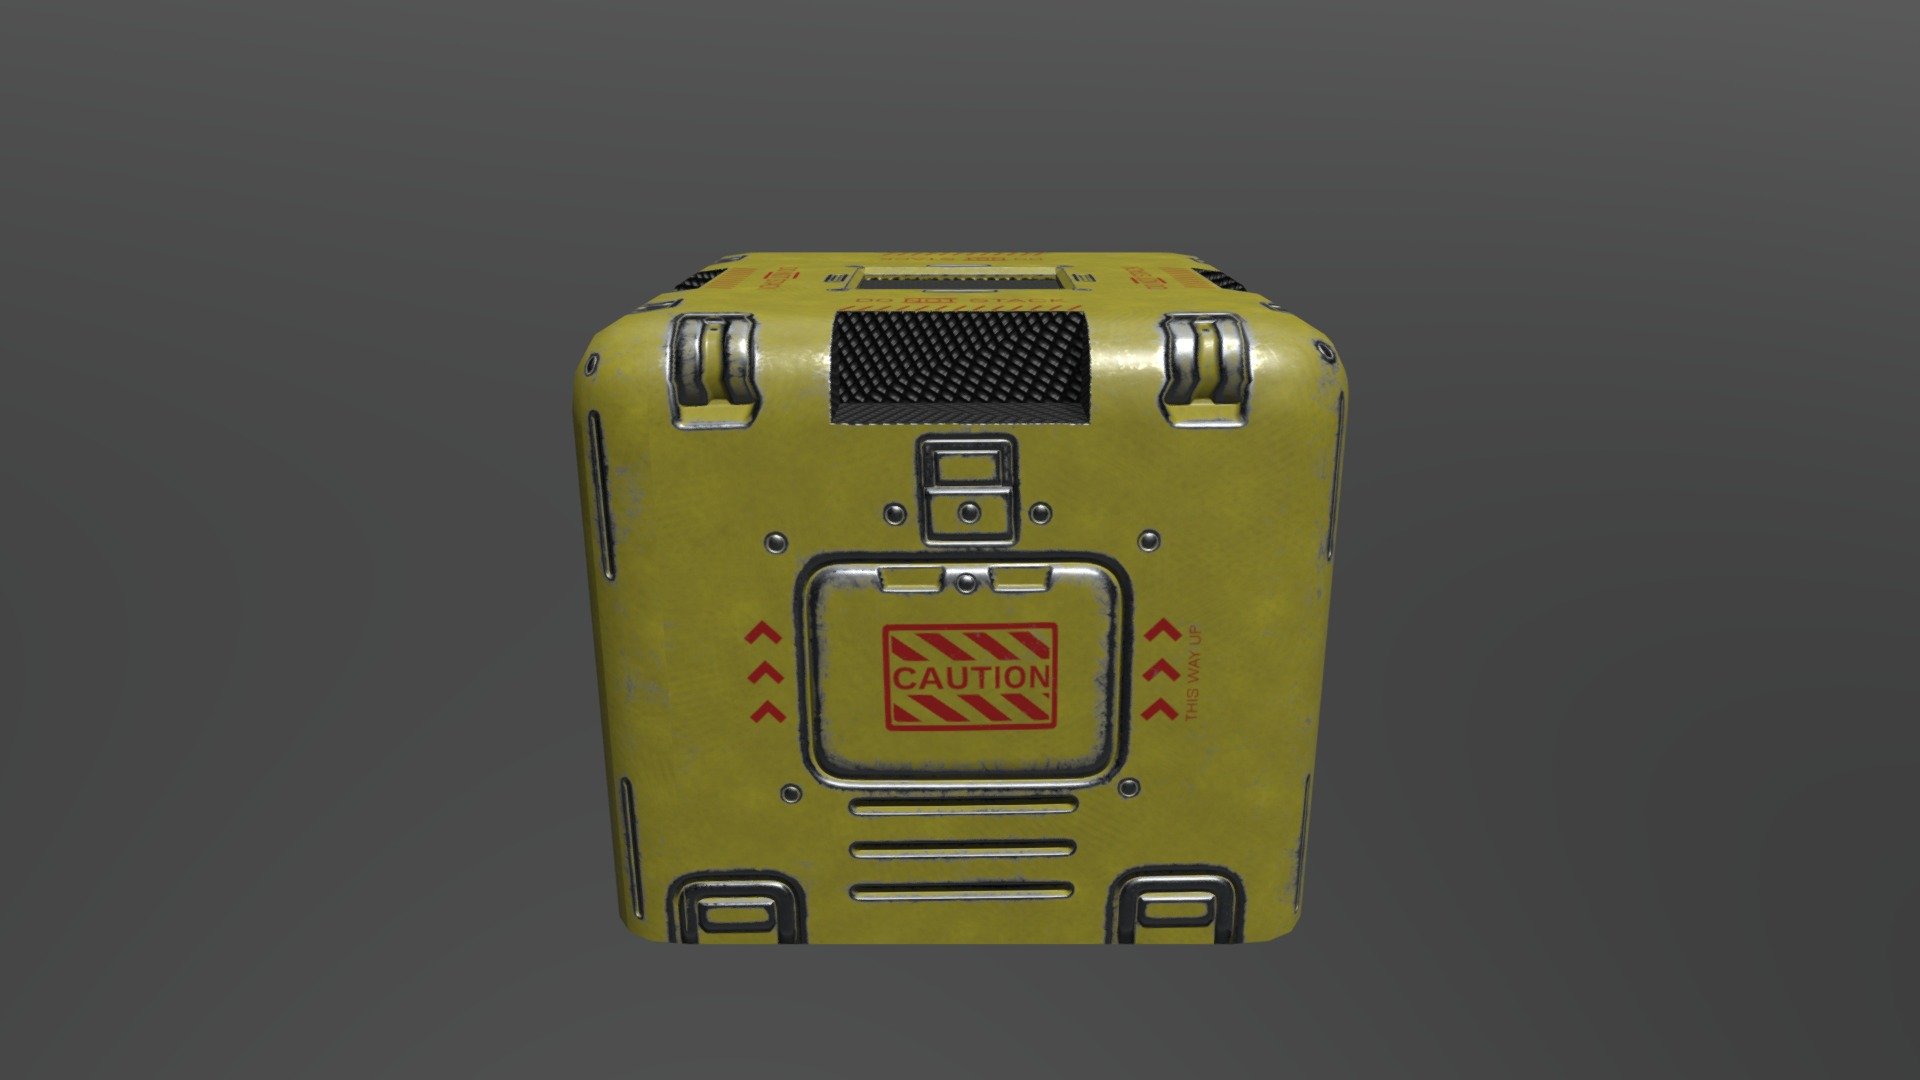 One of many key assets in my environment entry for Rising Star 2019. This is a sci-fi crate found on a space ship 3d model